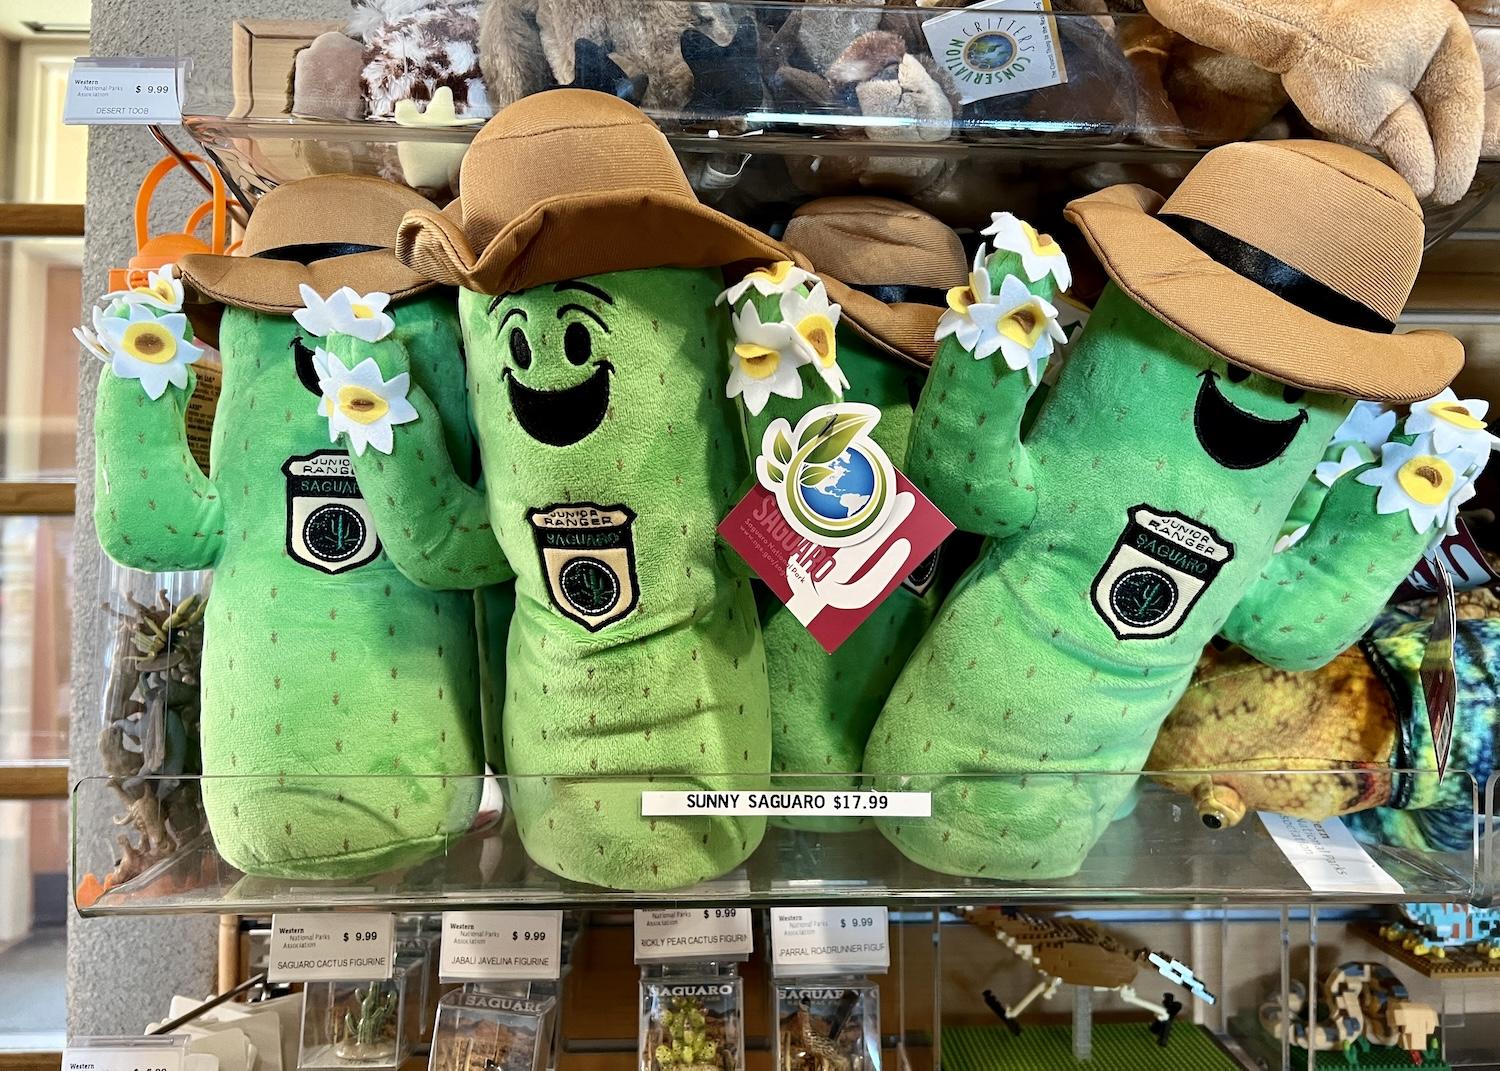 Sunny the Saguaro is Saguaro National Park's mascot and also comes as a plush toy.